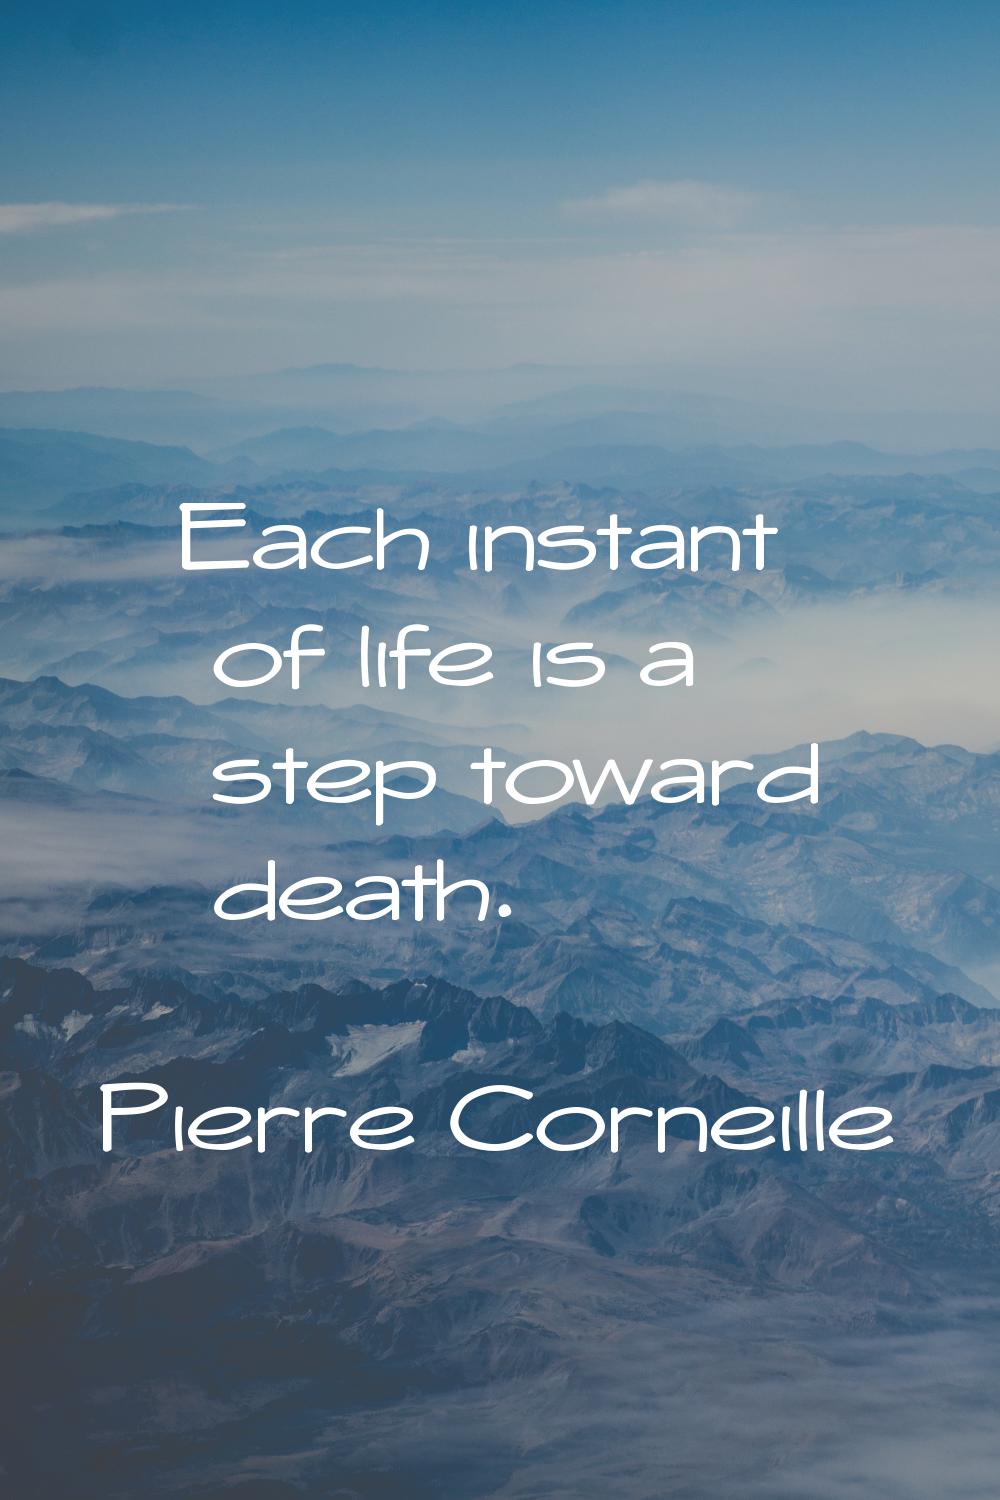 Each instant of life is a step toward death.